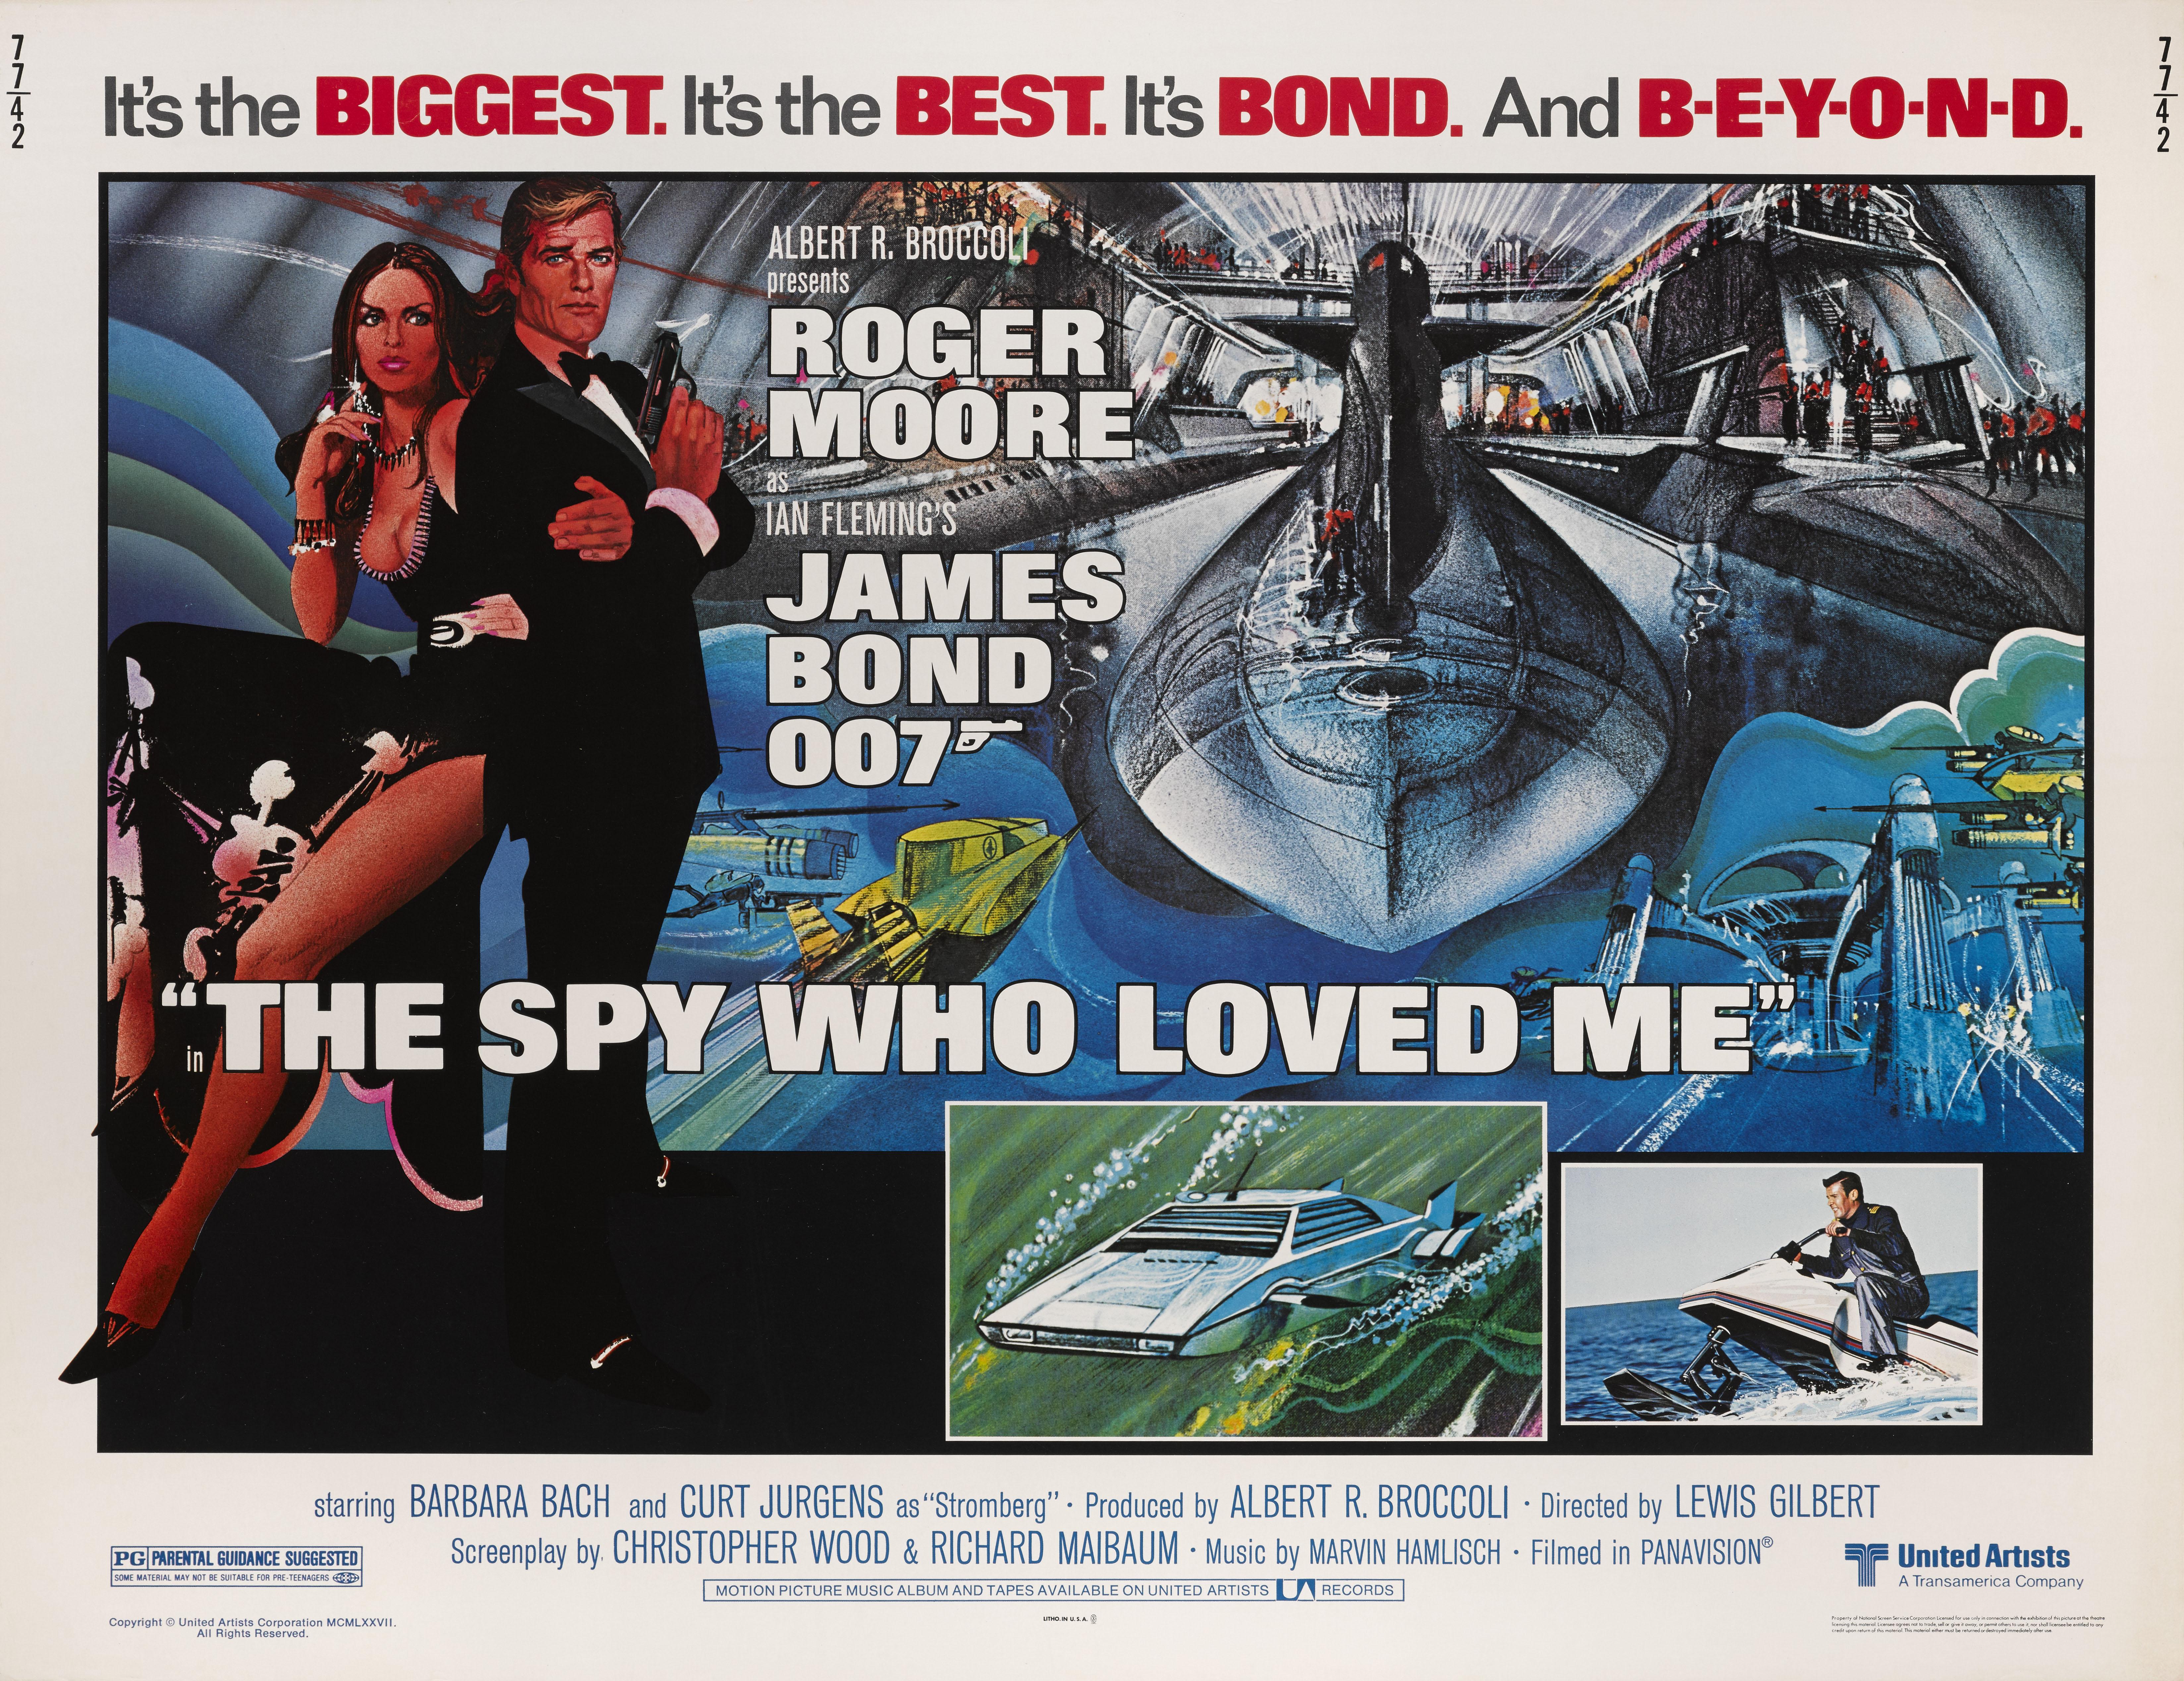 Original Us film poster for the 1977 James Bond films The Spy Who Loved starring Roger Moore and Barbra Bach.
The film was directed by Lewis Gilbert.
The artwork on this poster is by Bob Peak (1927-1992) This poster is unfolded and conservation